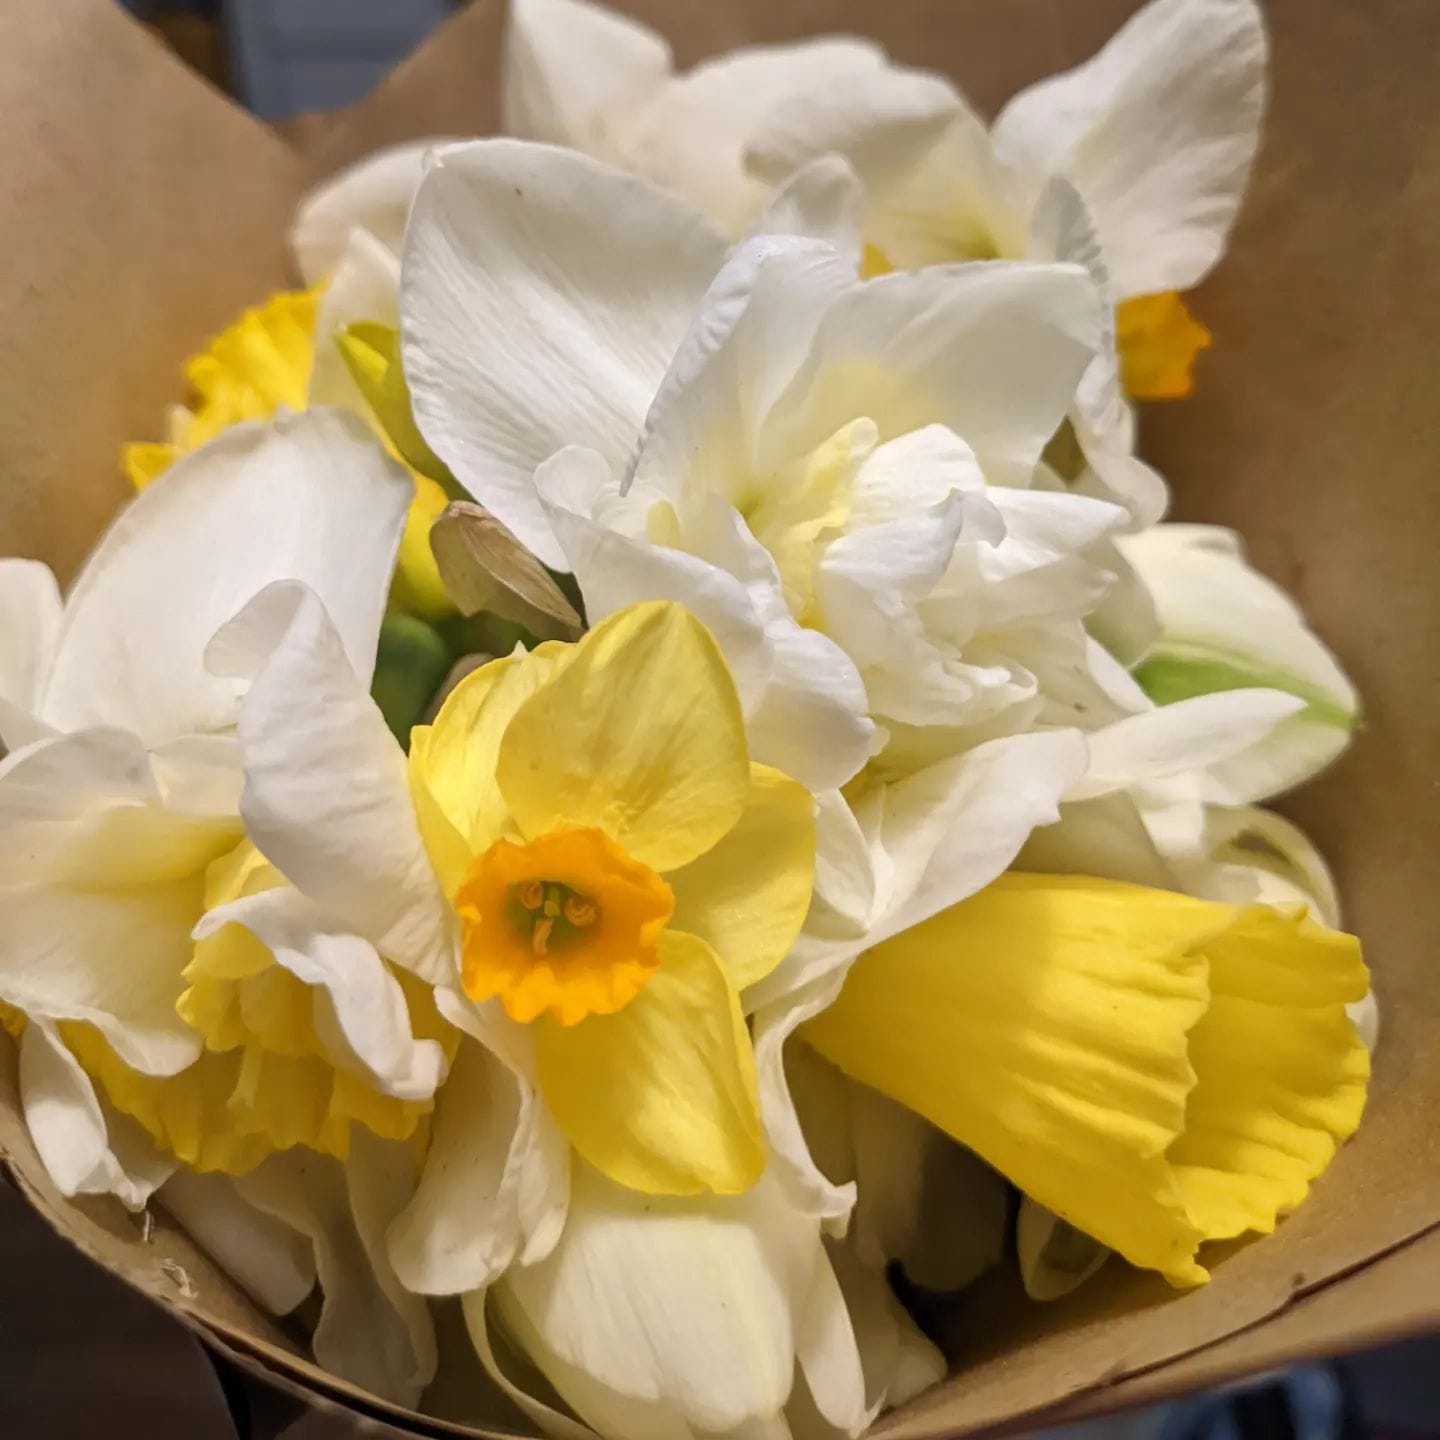 A bouquet of daffodils.